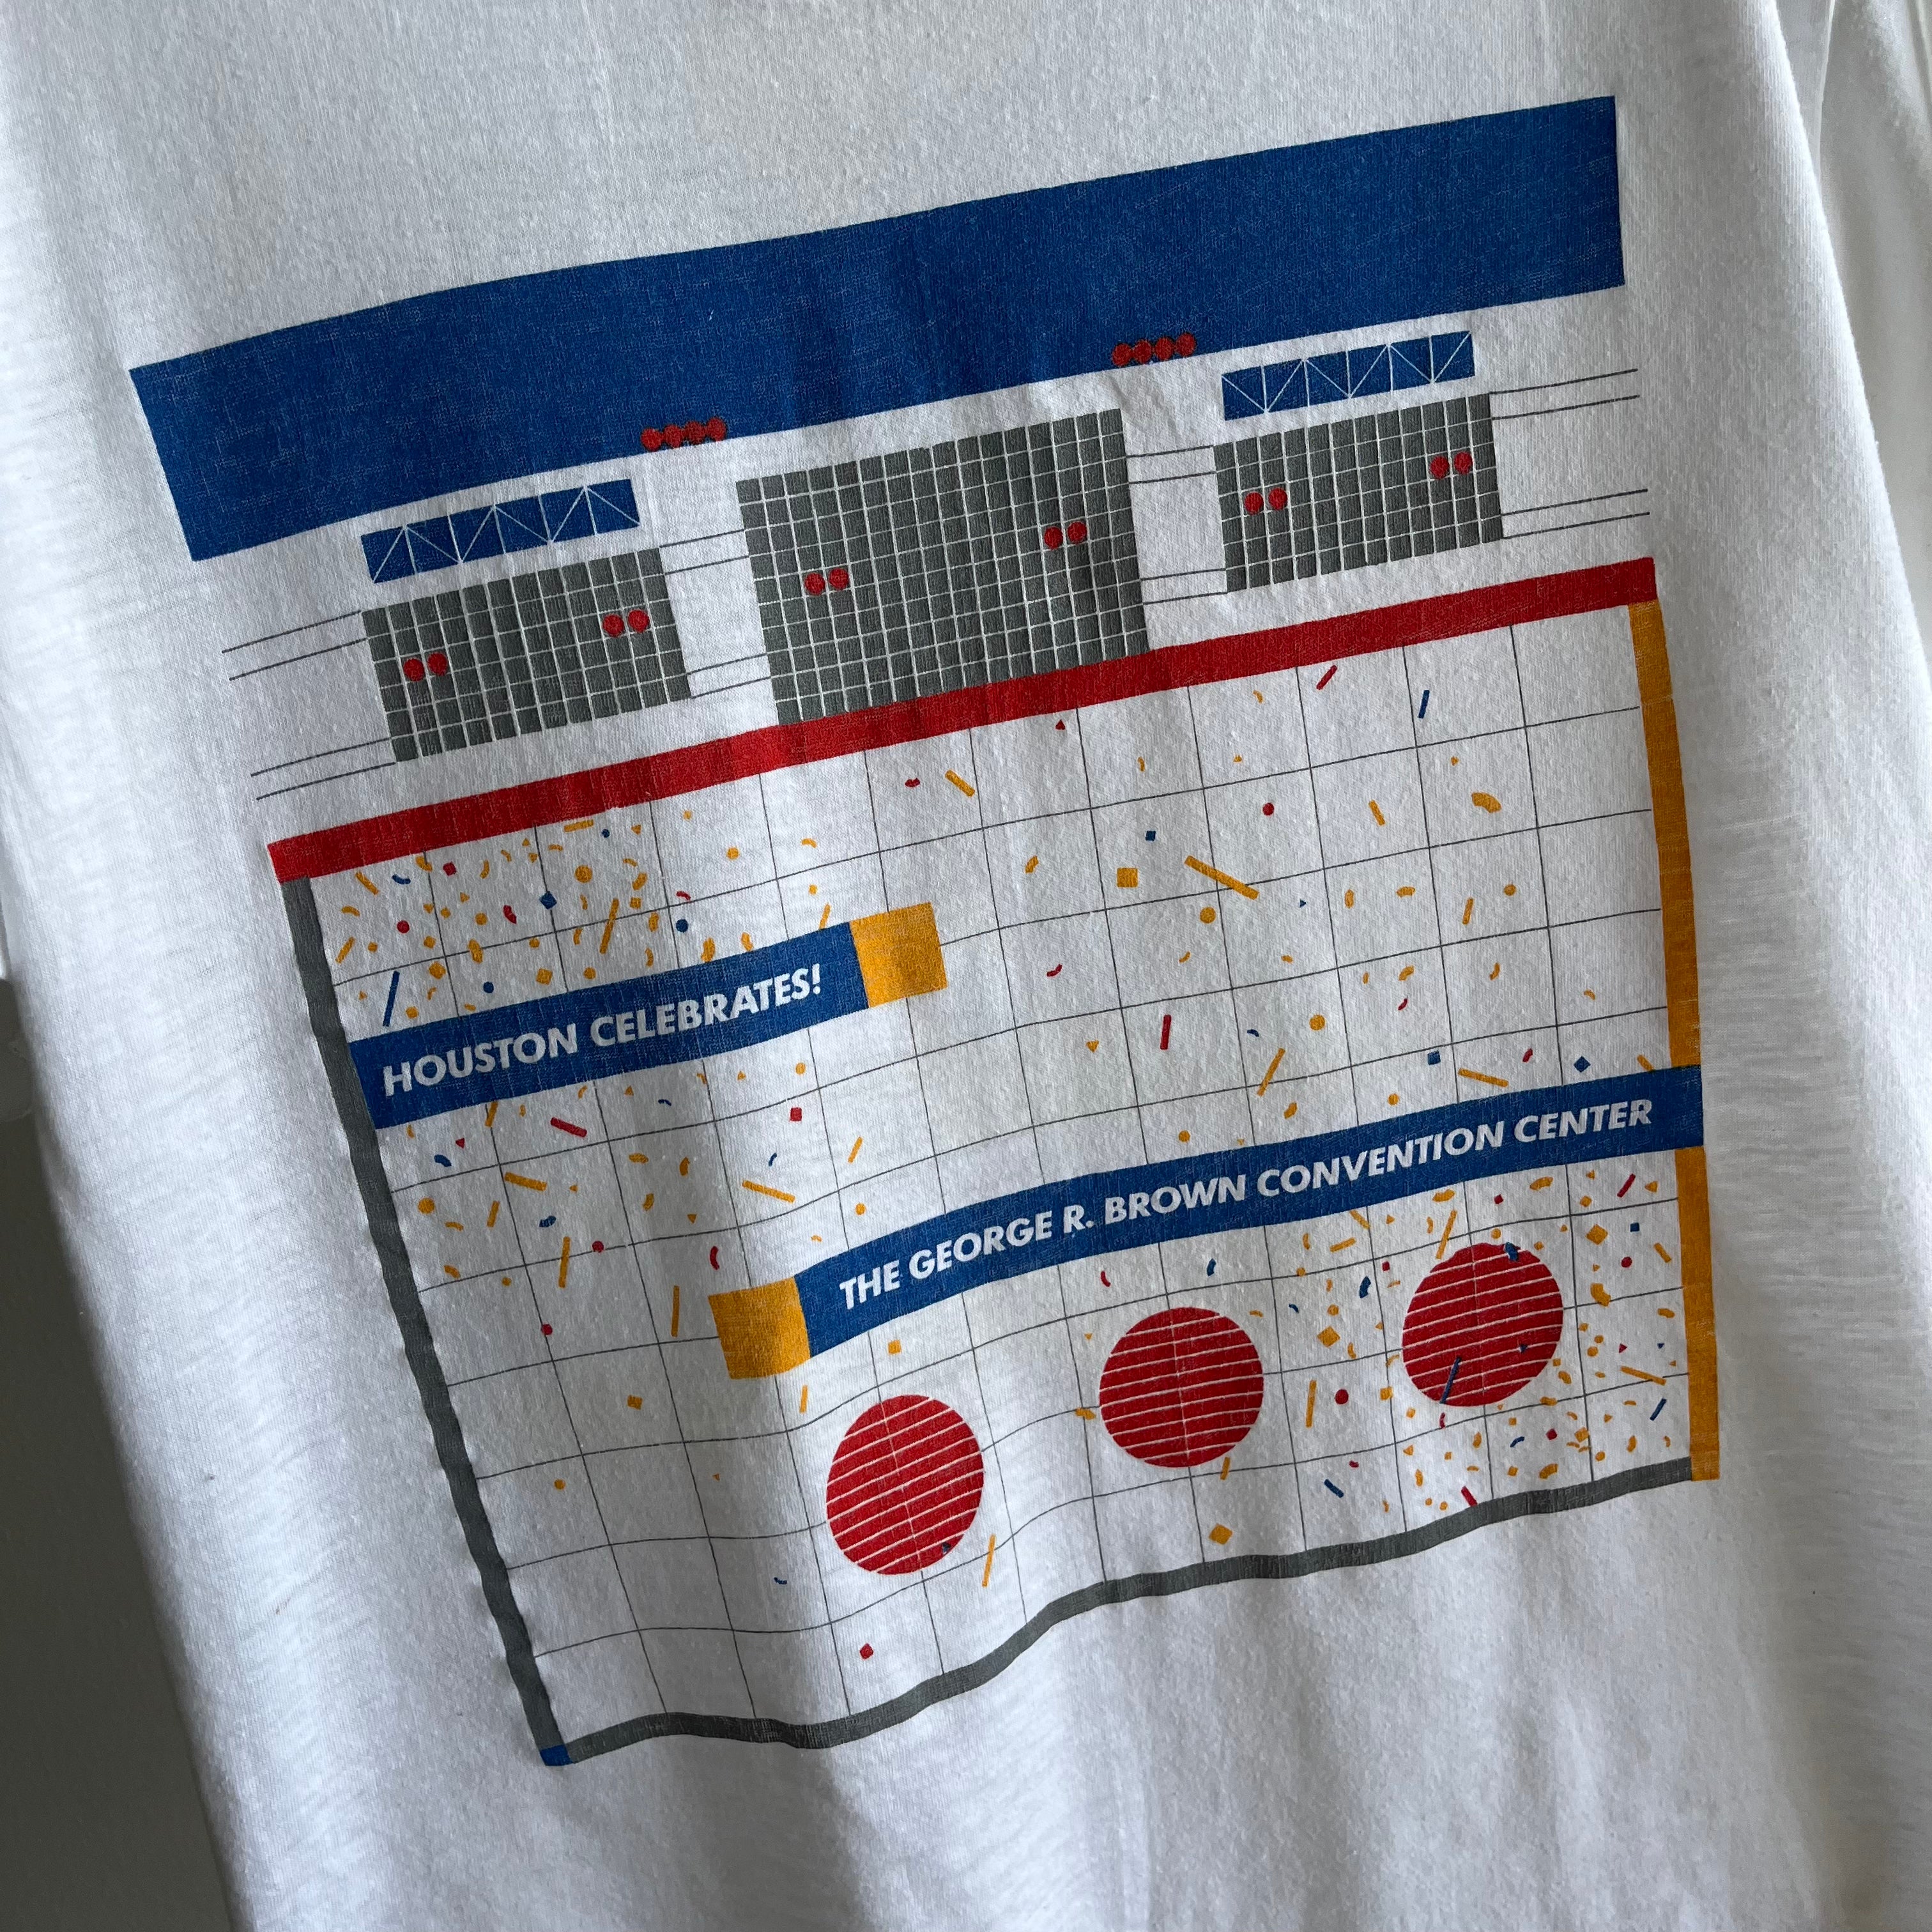 1980s Houston Celebrates The George R. Brown Convention Center T-Shirt